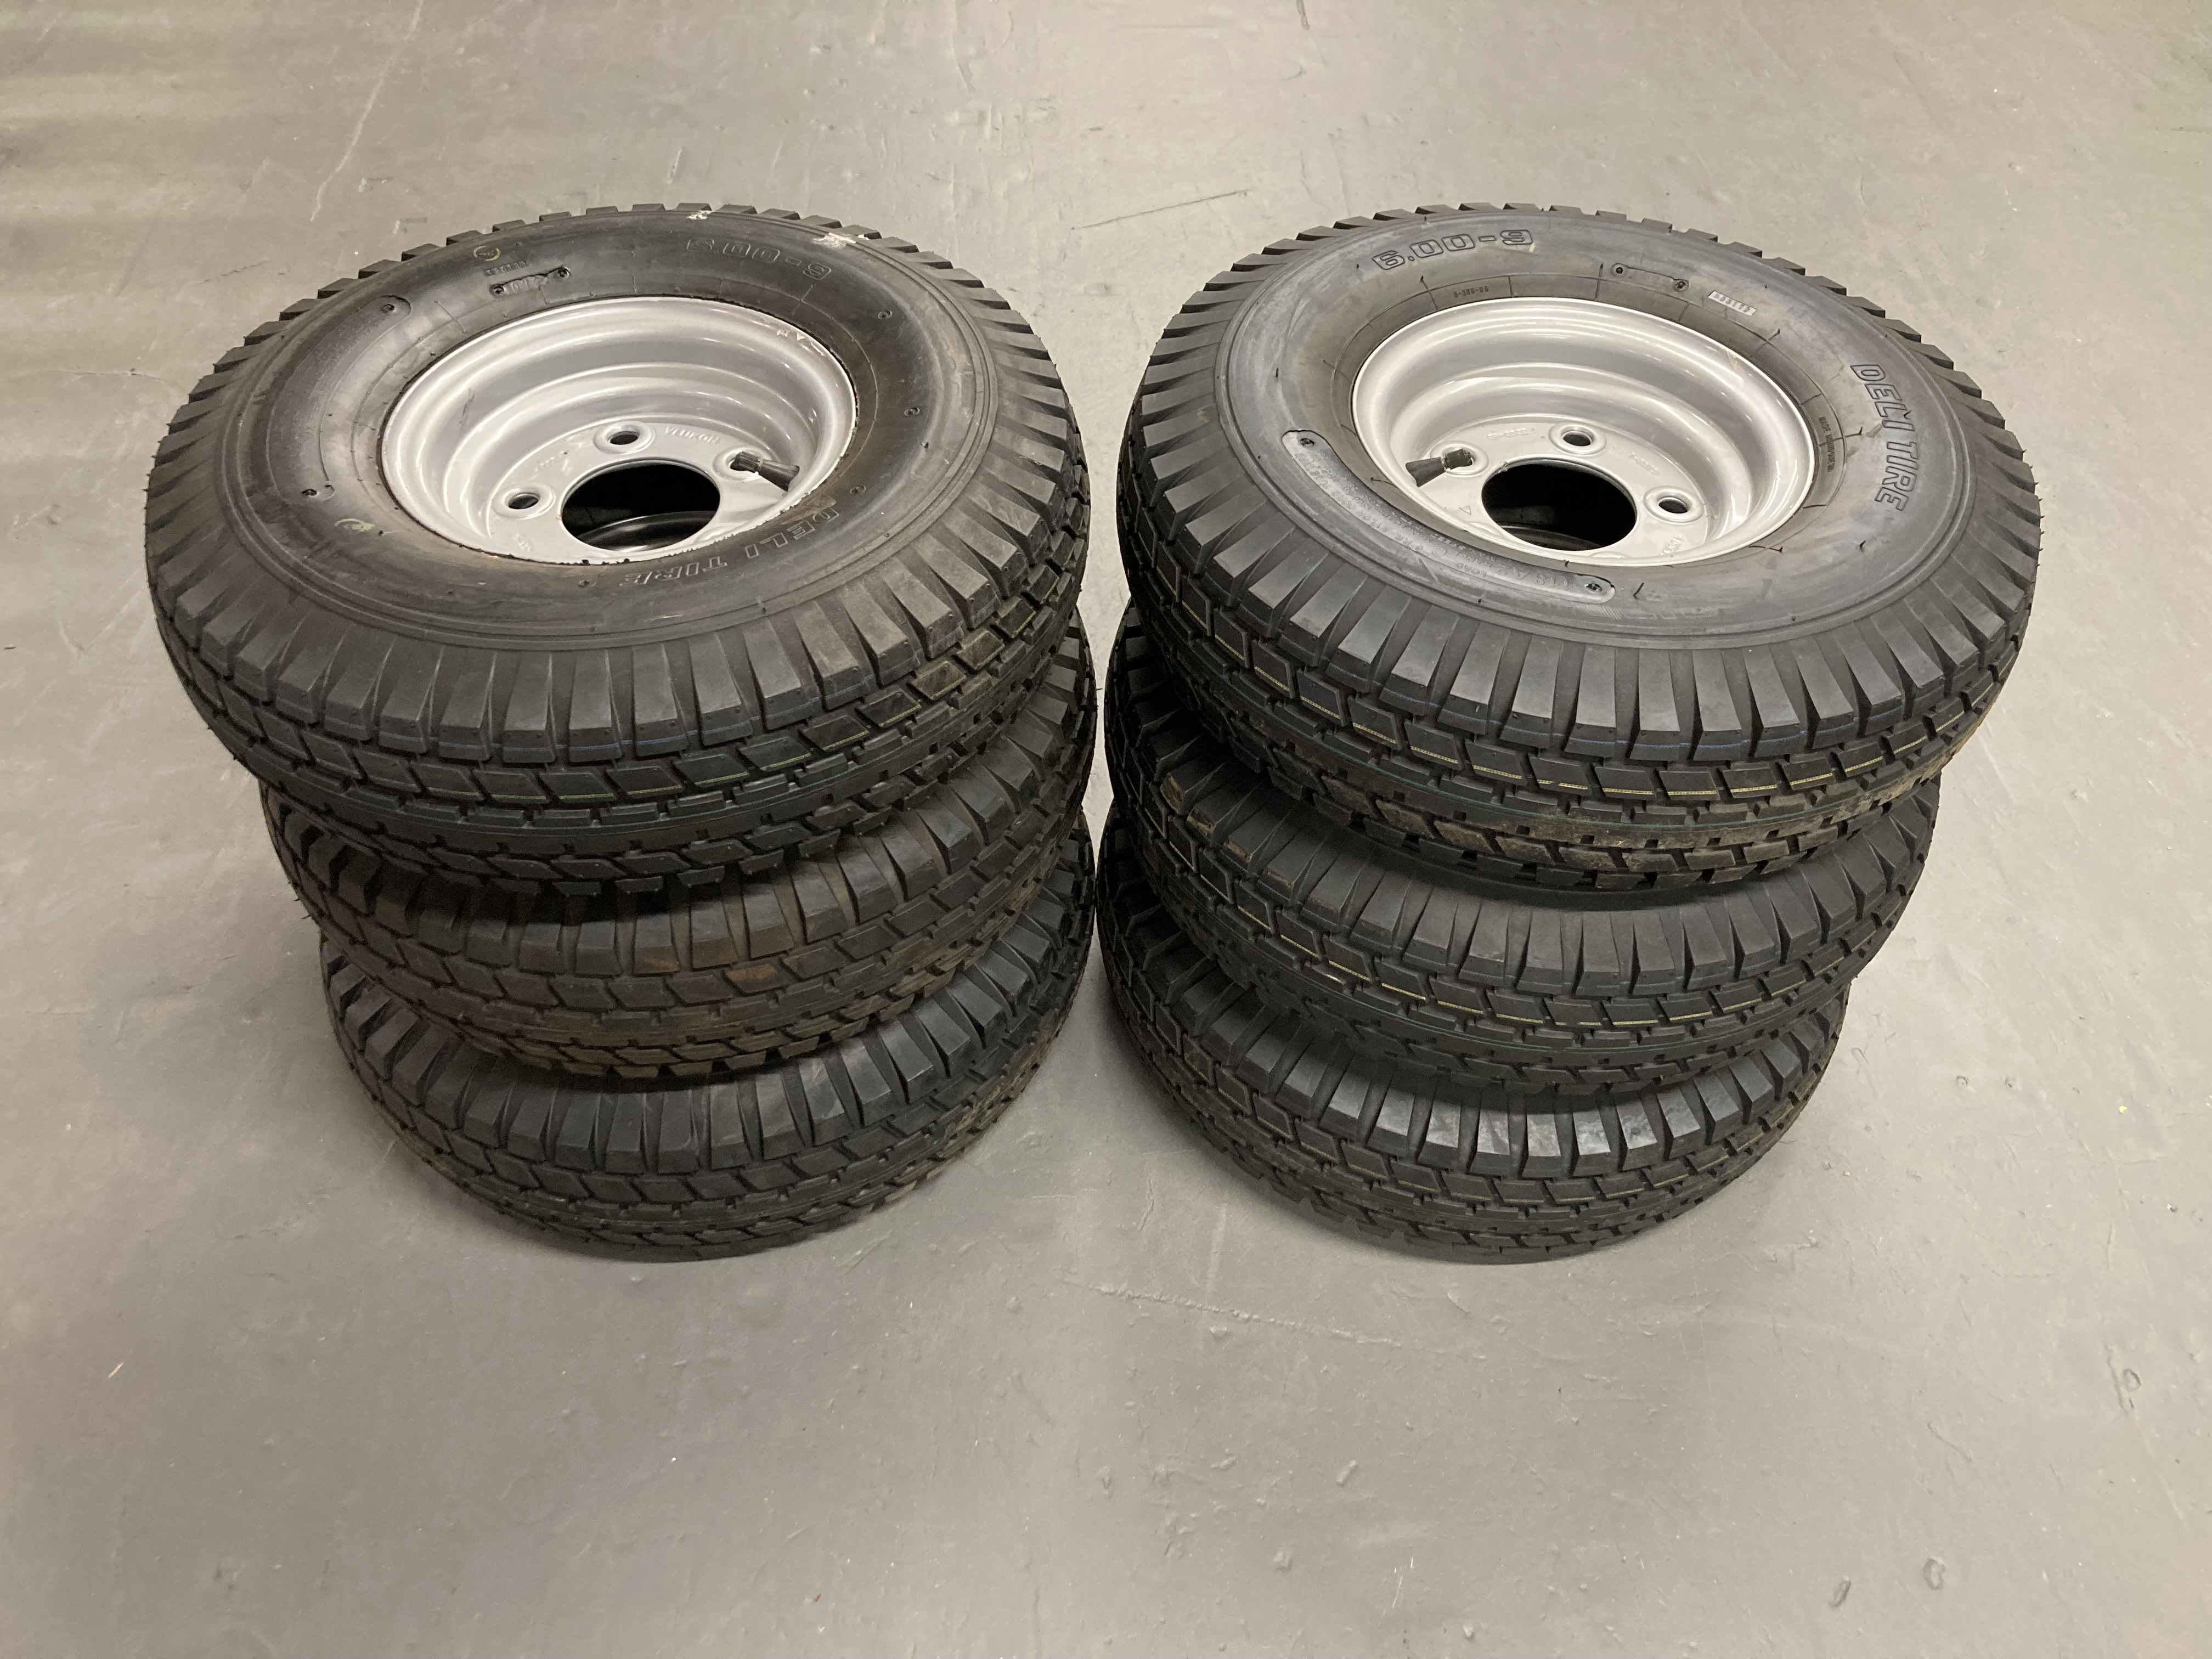 Six wheels on metal rims with Deli Tire, 6.